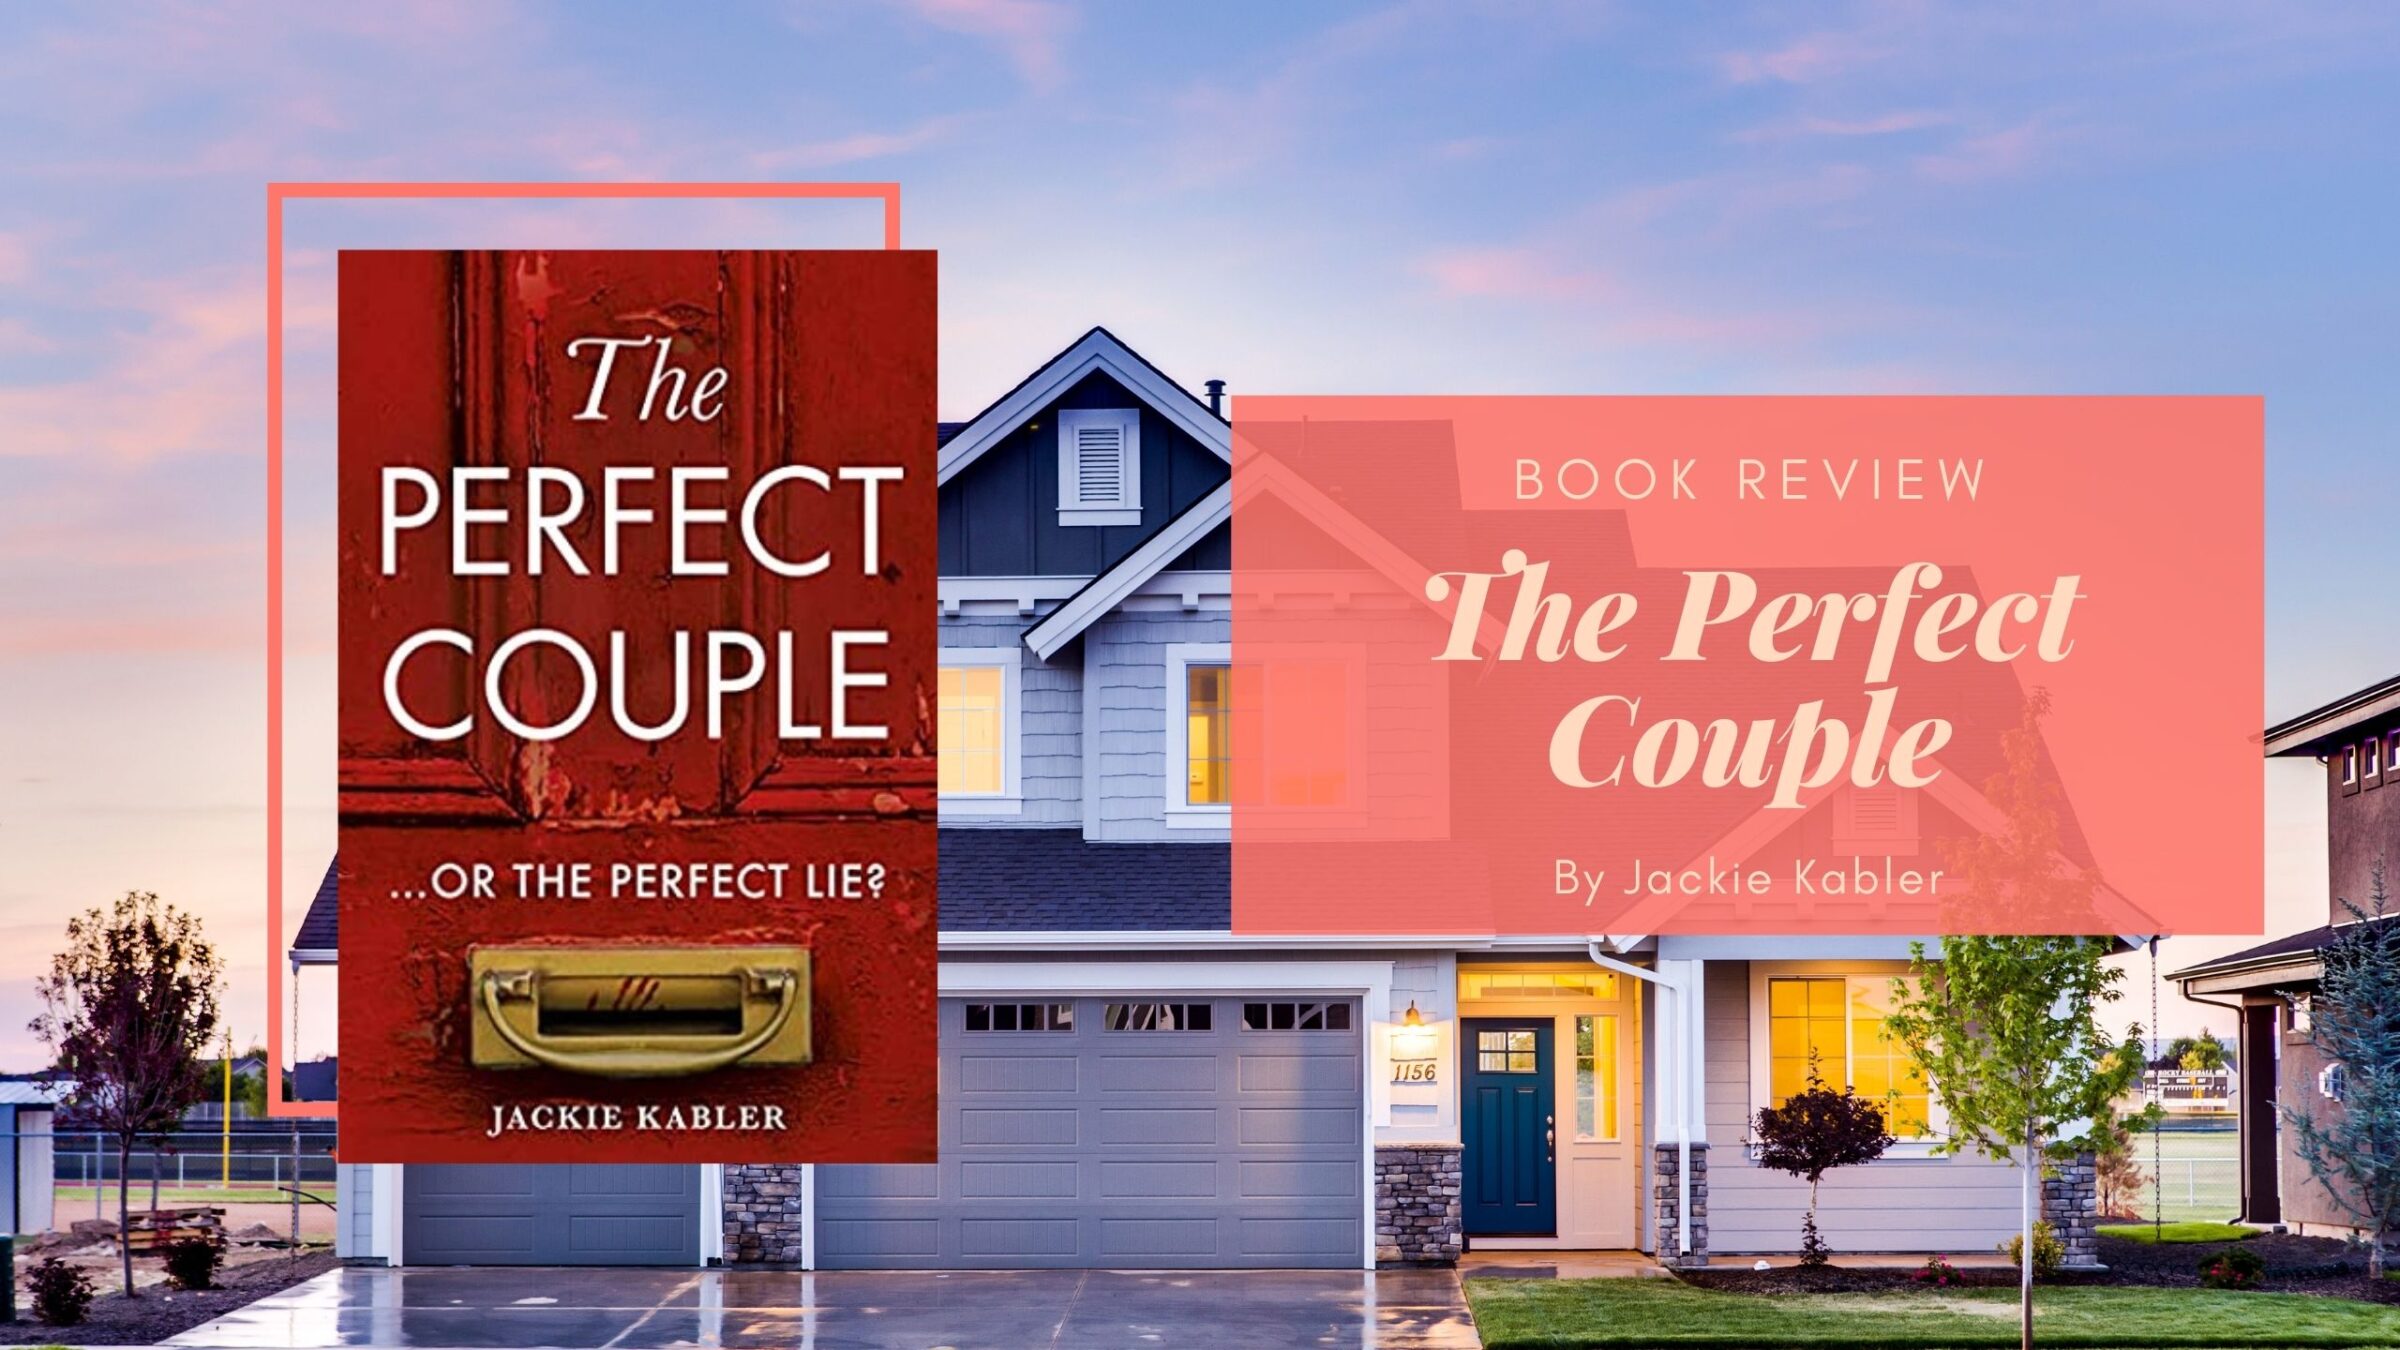 The Perfect Couple by Jackie Kabler book review